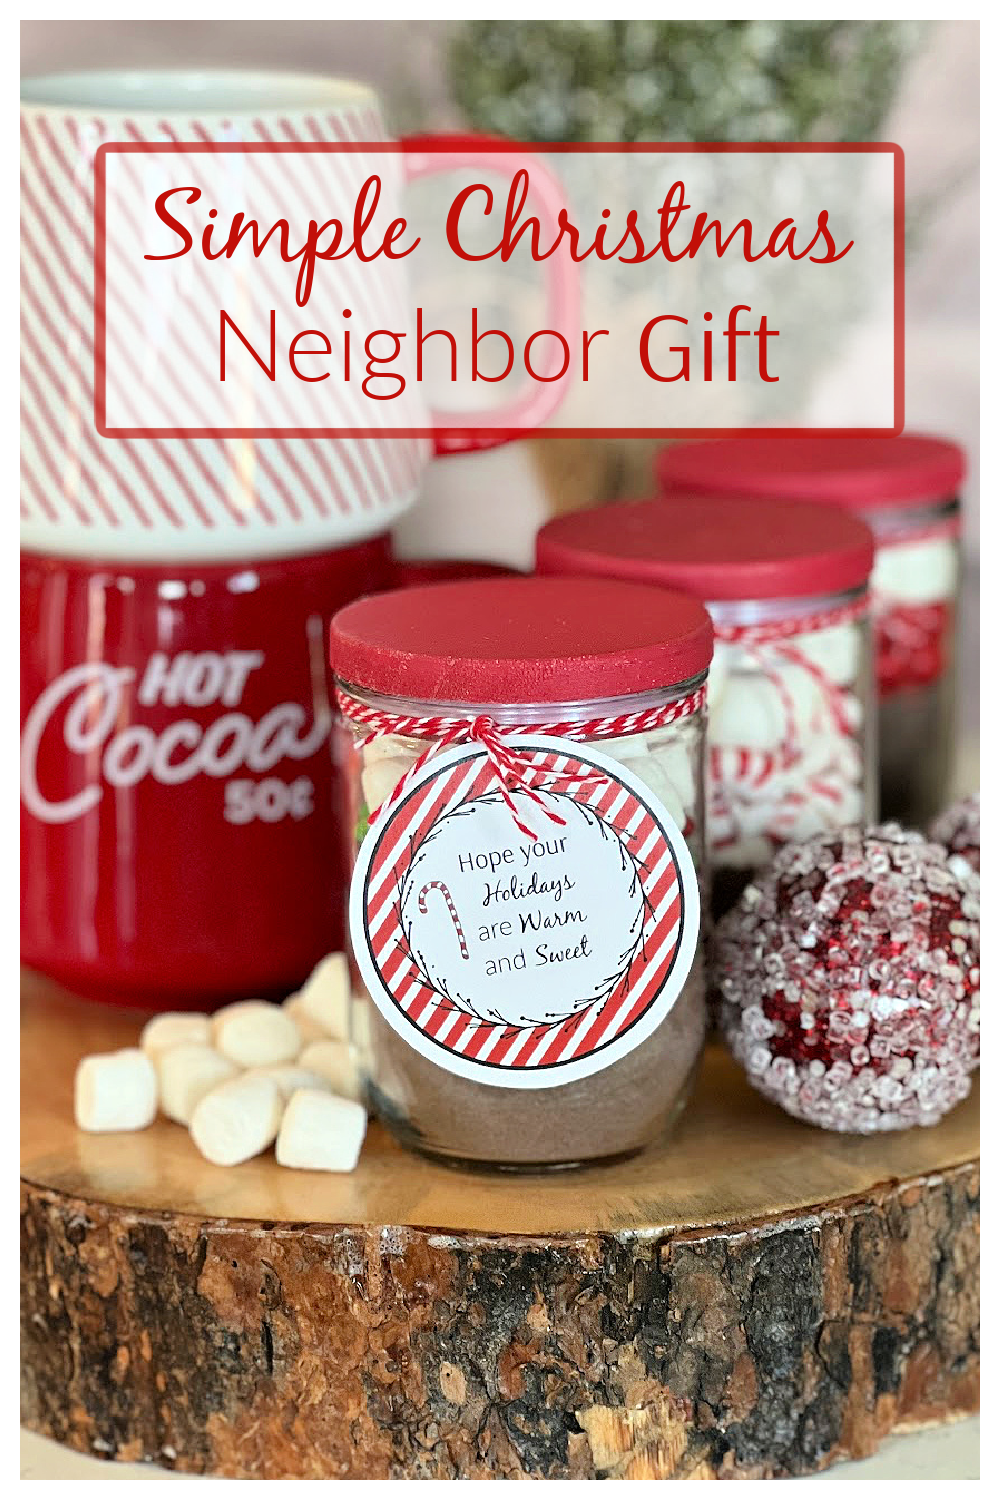 Christmas Hot Chocolate in a Jar Gift: